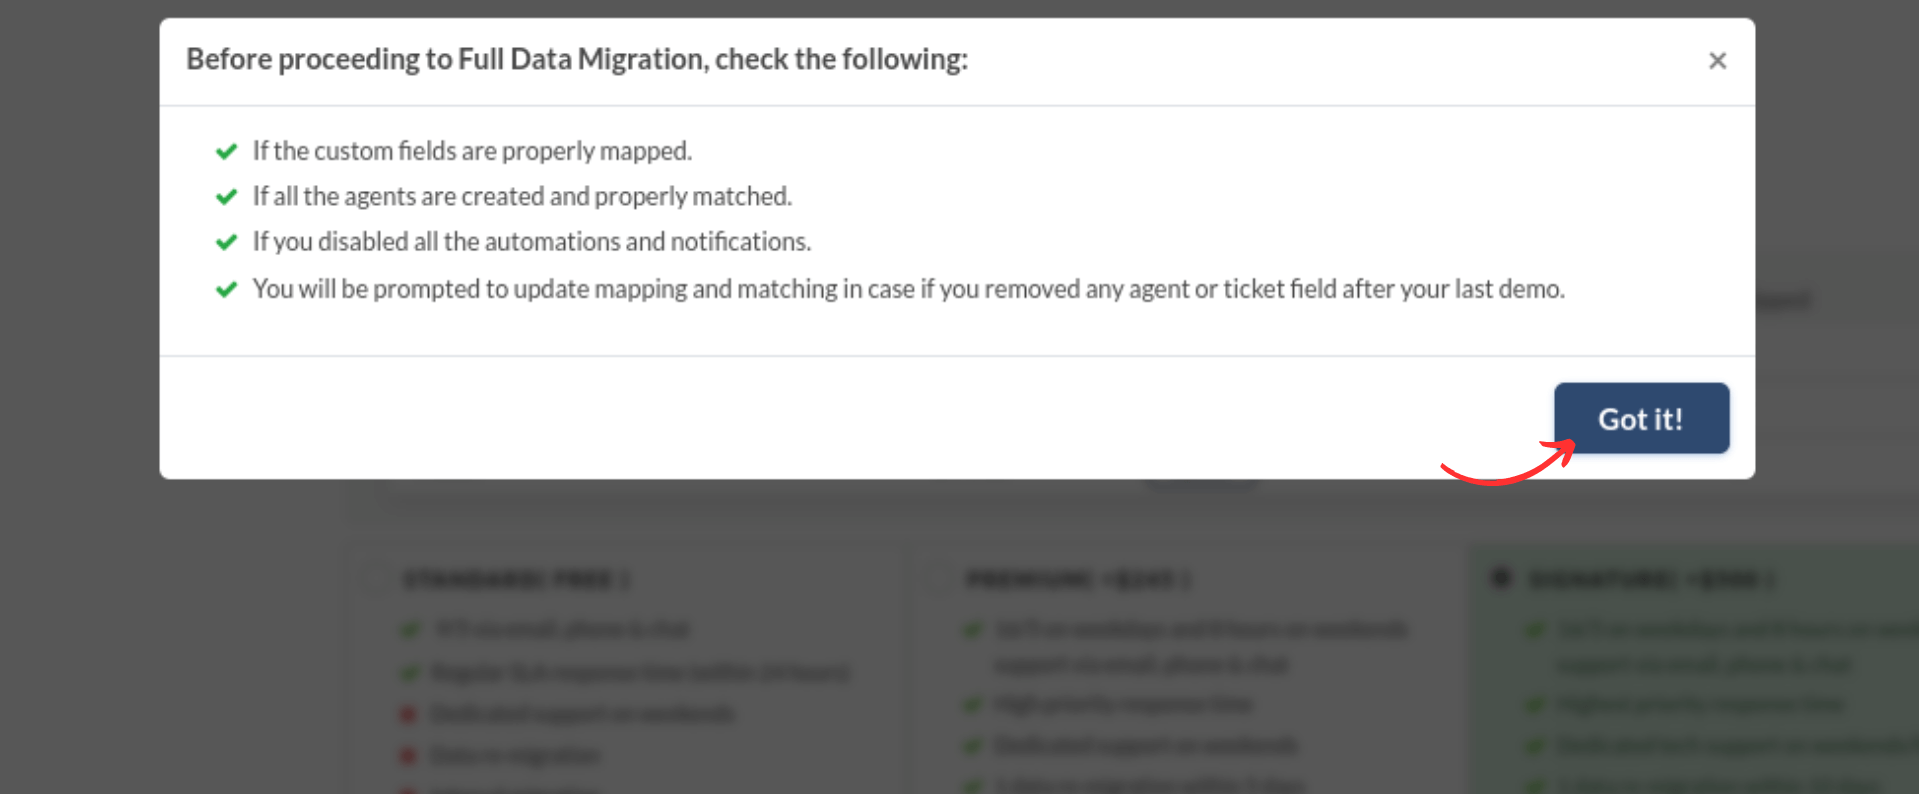 Migration Wizard - Checklist Before the Full Migration